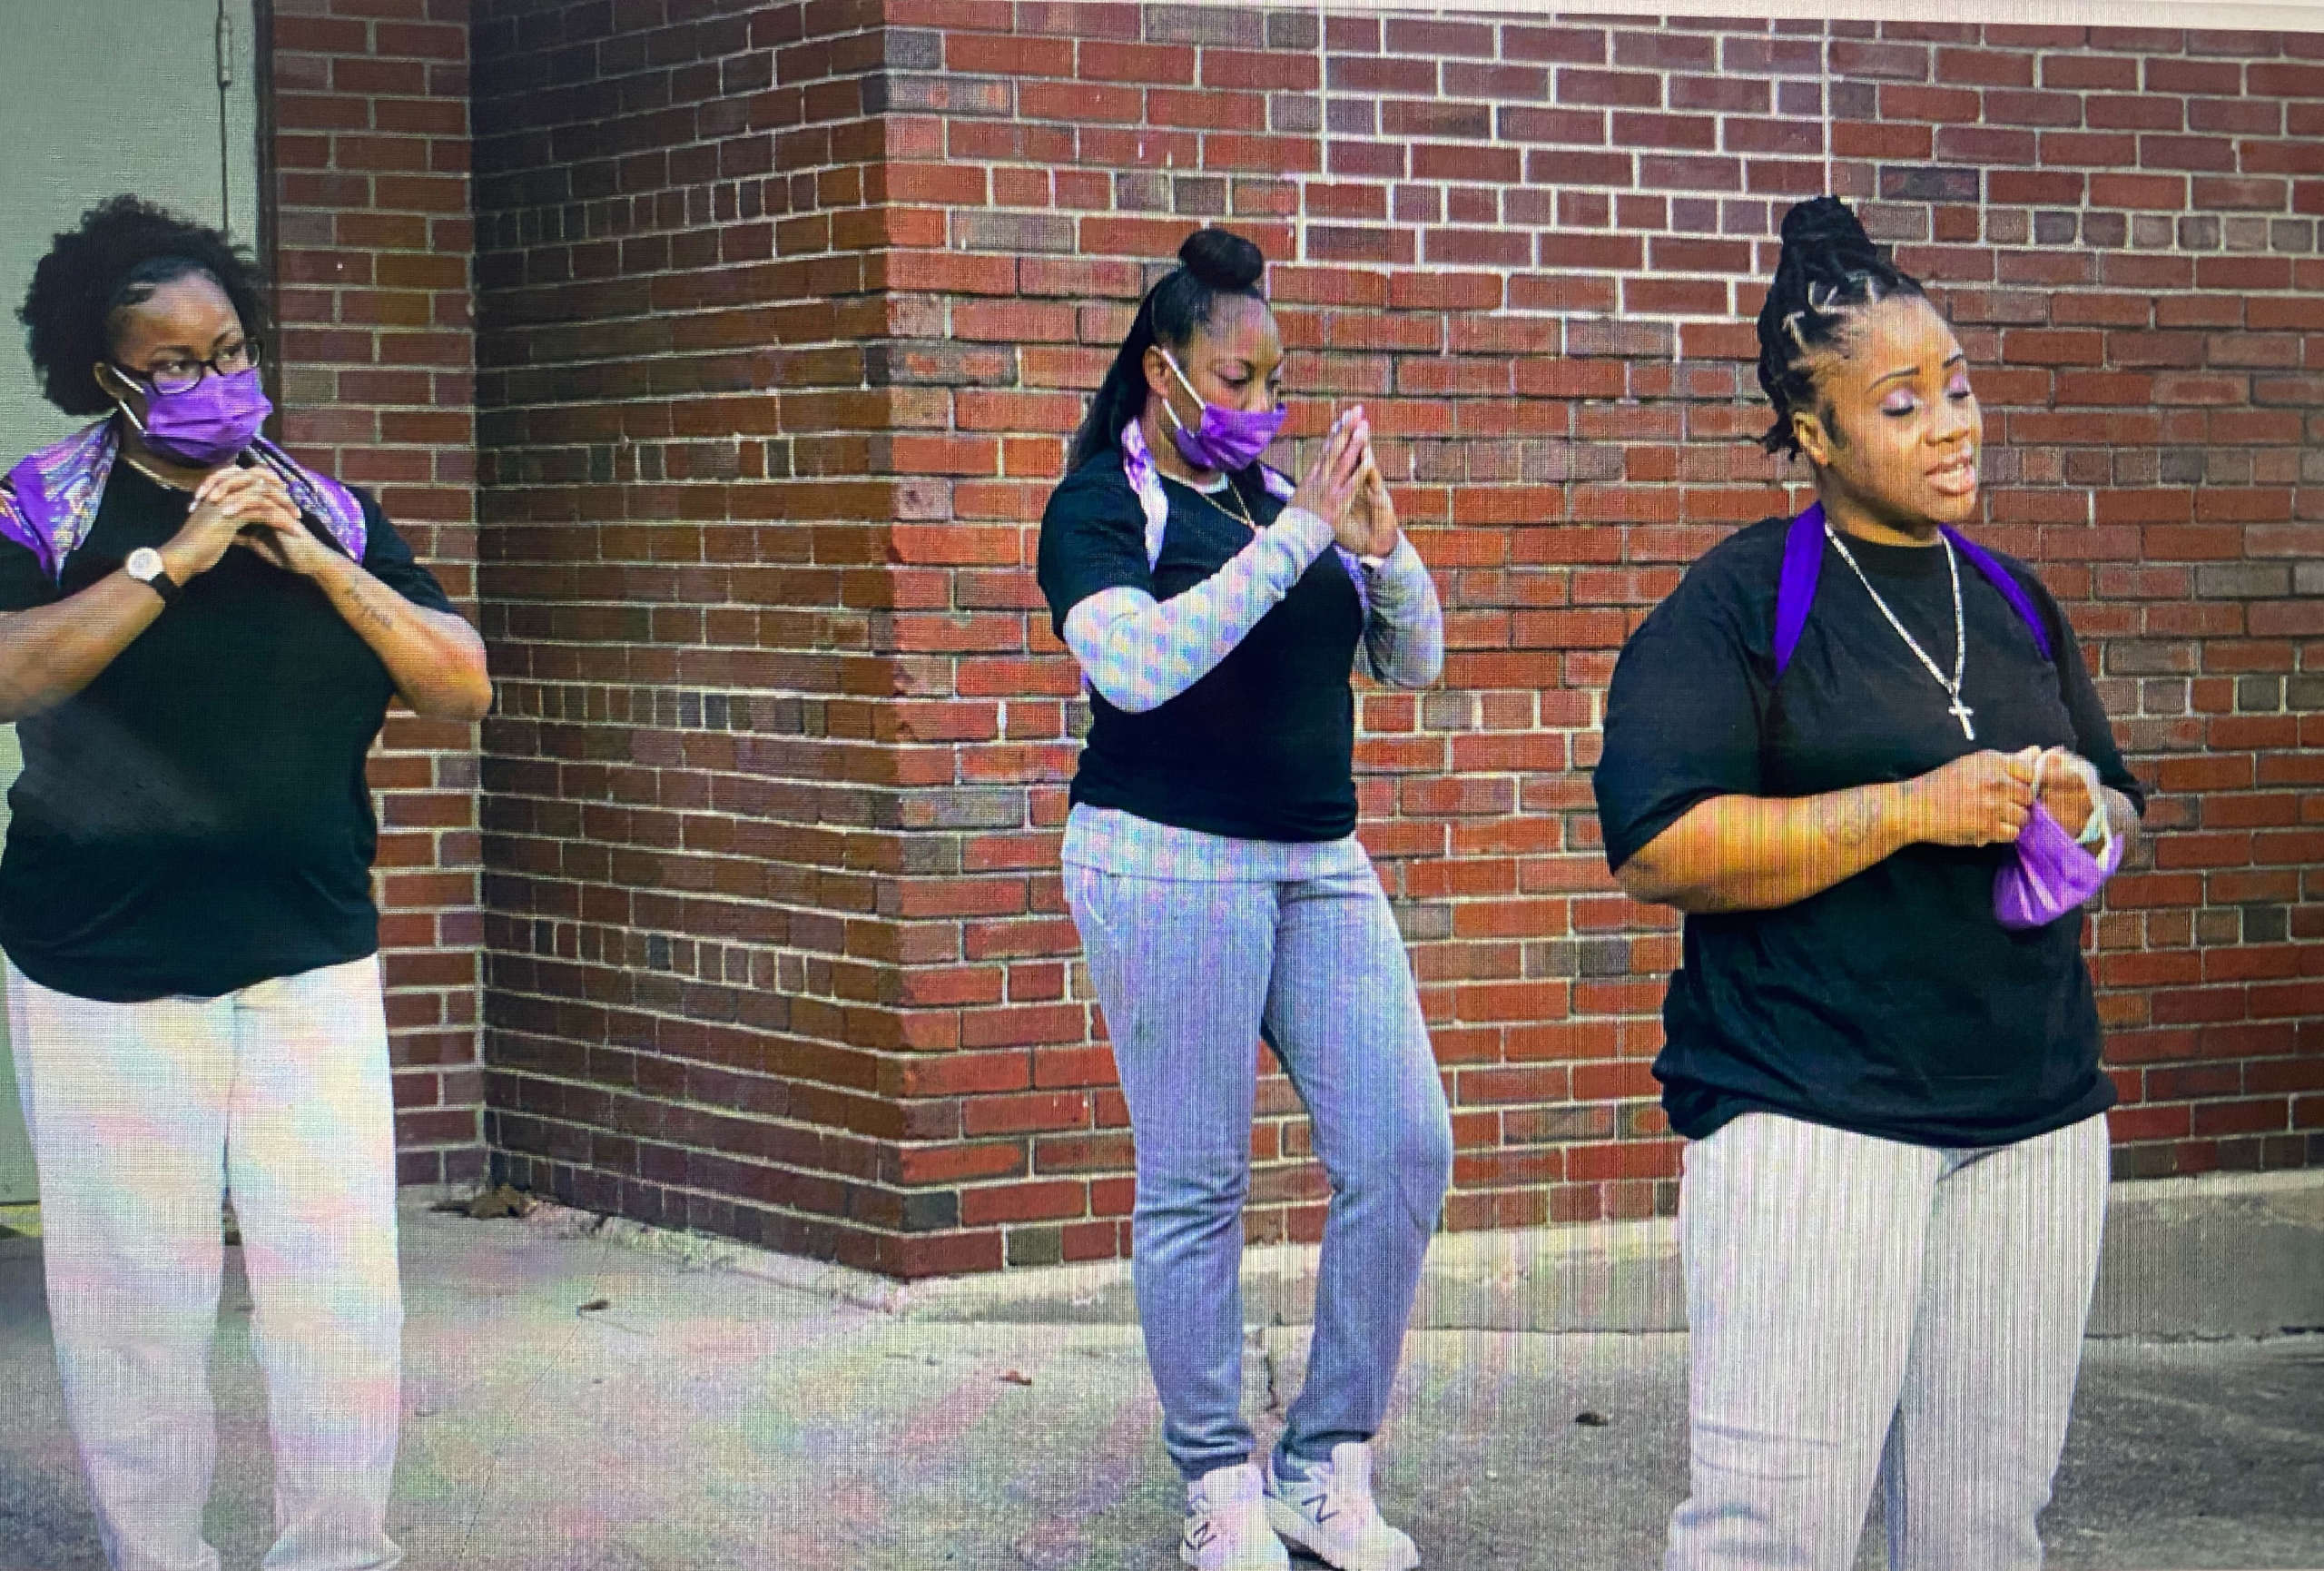 In October 2021, DeBraca Harris was part of a performance about domestic violence by Acting Out, a theater troupe started 19 years ago at Dwight Correctional Center, Illinois's (now-closed) women's prison.